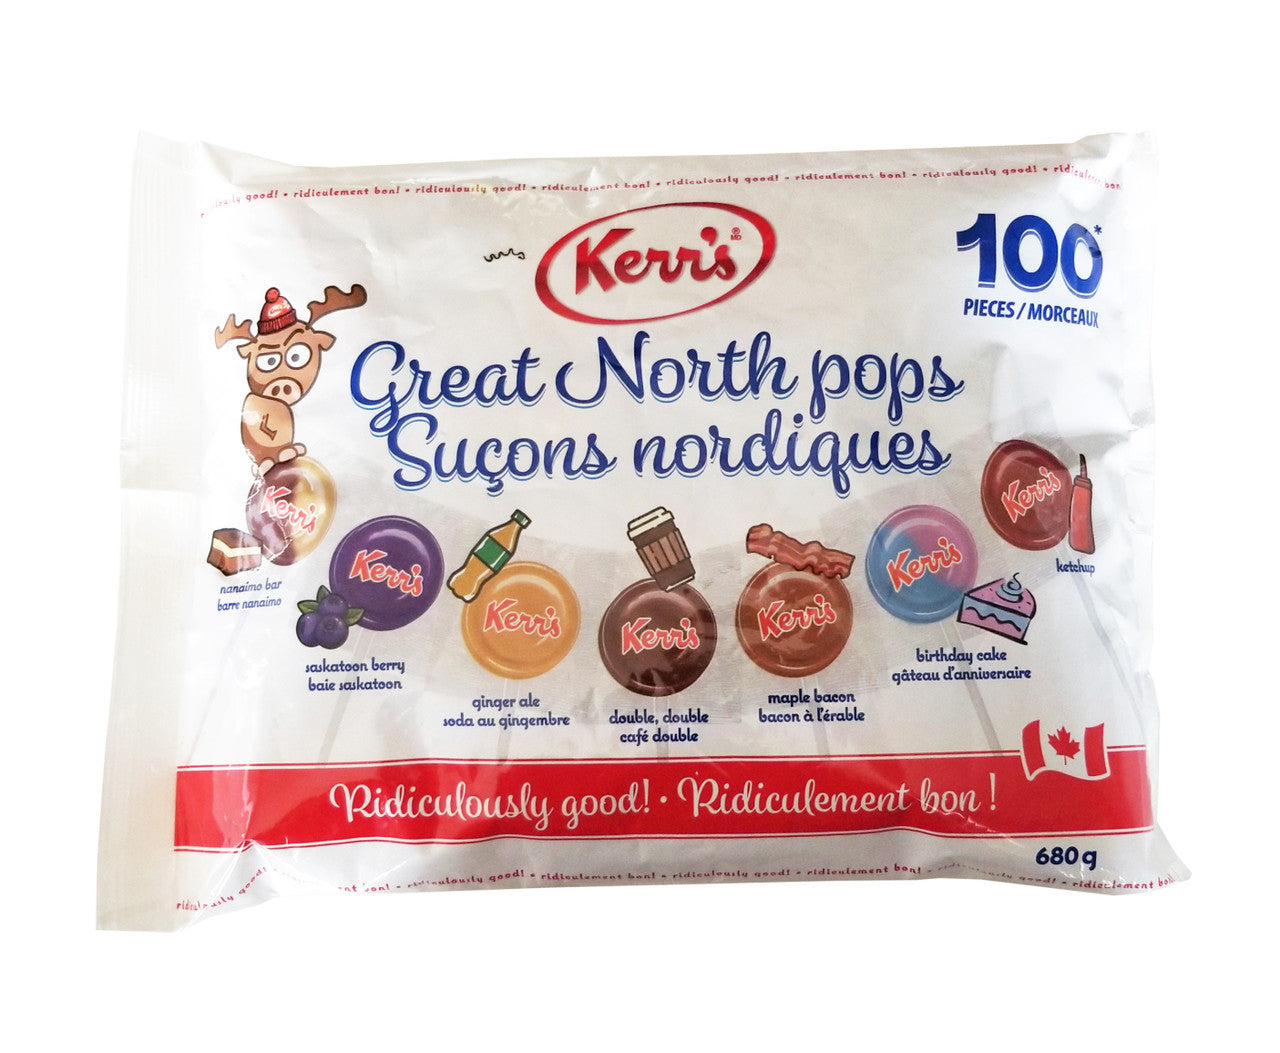 Kerr's Great North Pops, 100 pieces, 680g/23.8 oz. Bag {Imported from Canada}